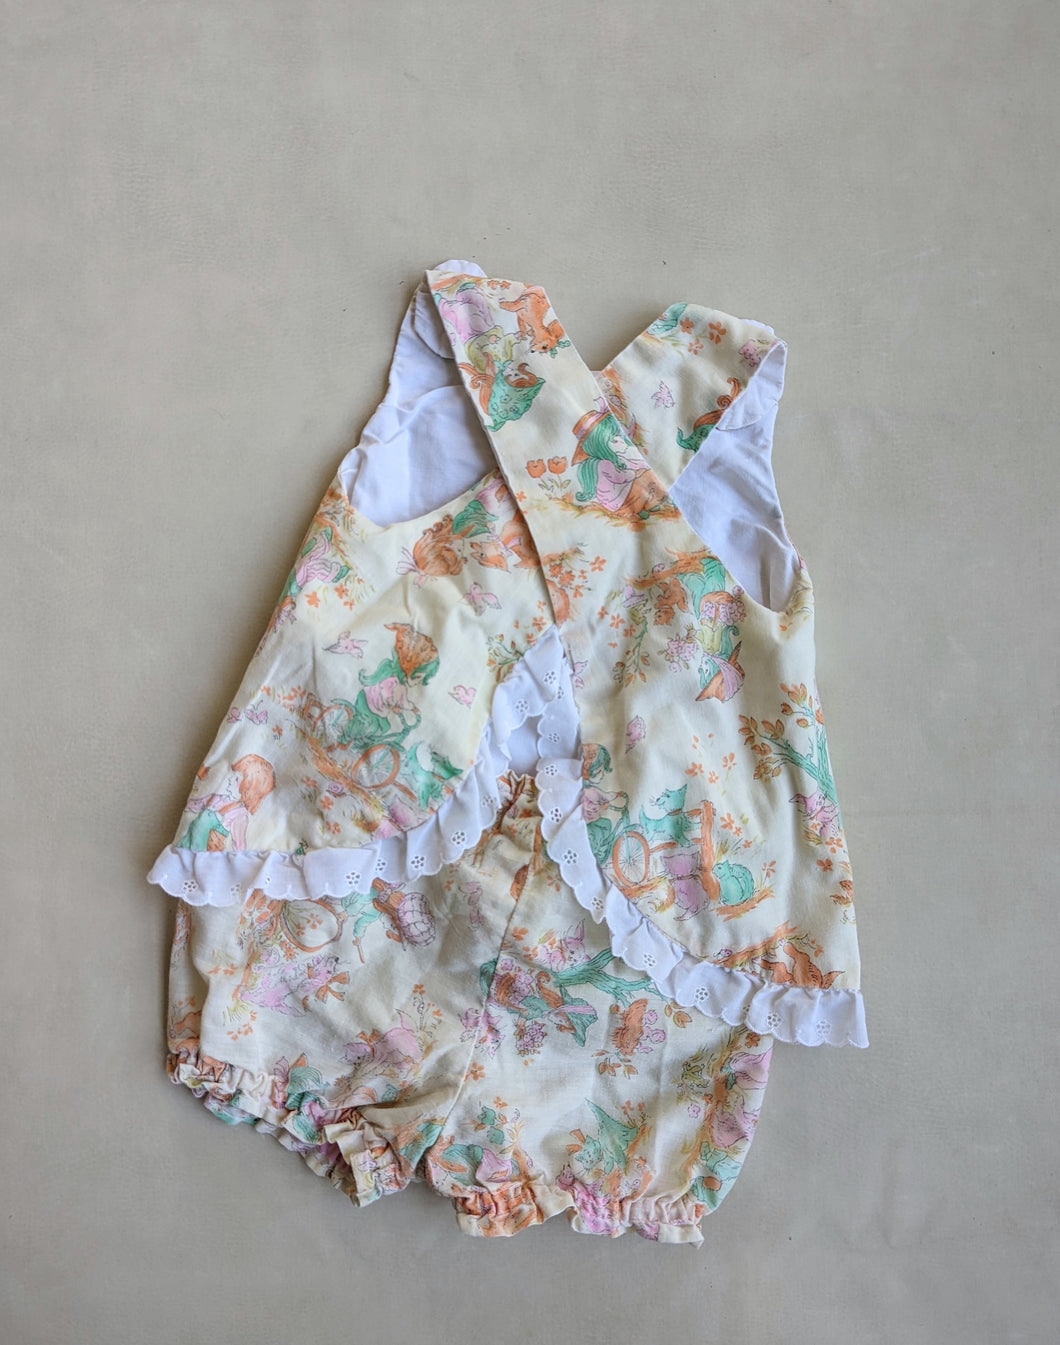 Handmade Floral Kitty Outfit 2t